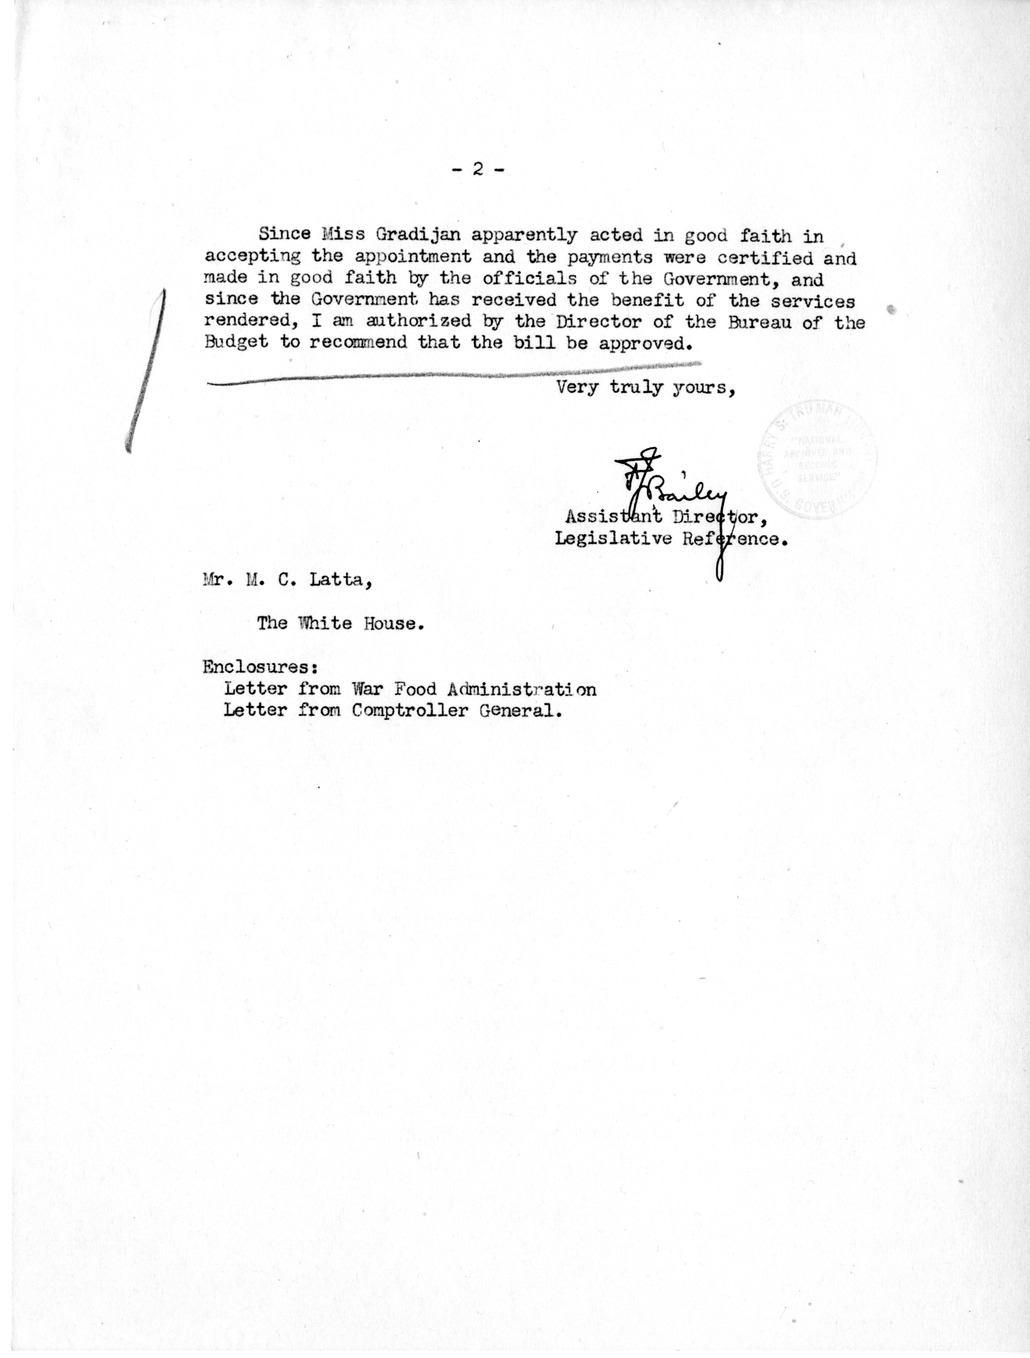 Memorandum from Frederick J. Bailey to M. C. Latta, S. 316, For the Relief of June I. Gradijan, with Attachments